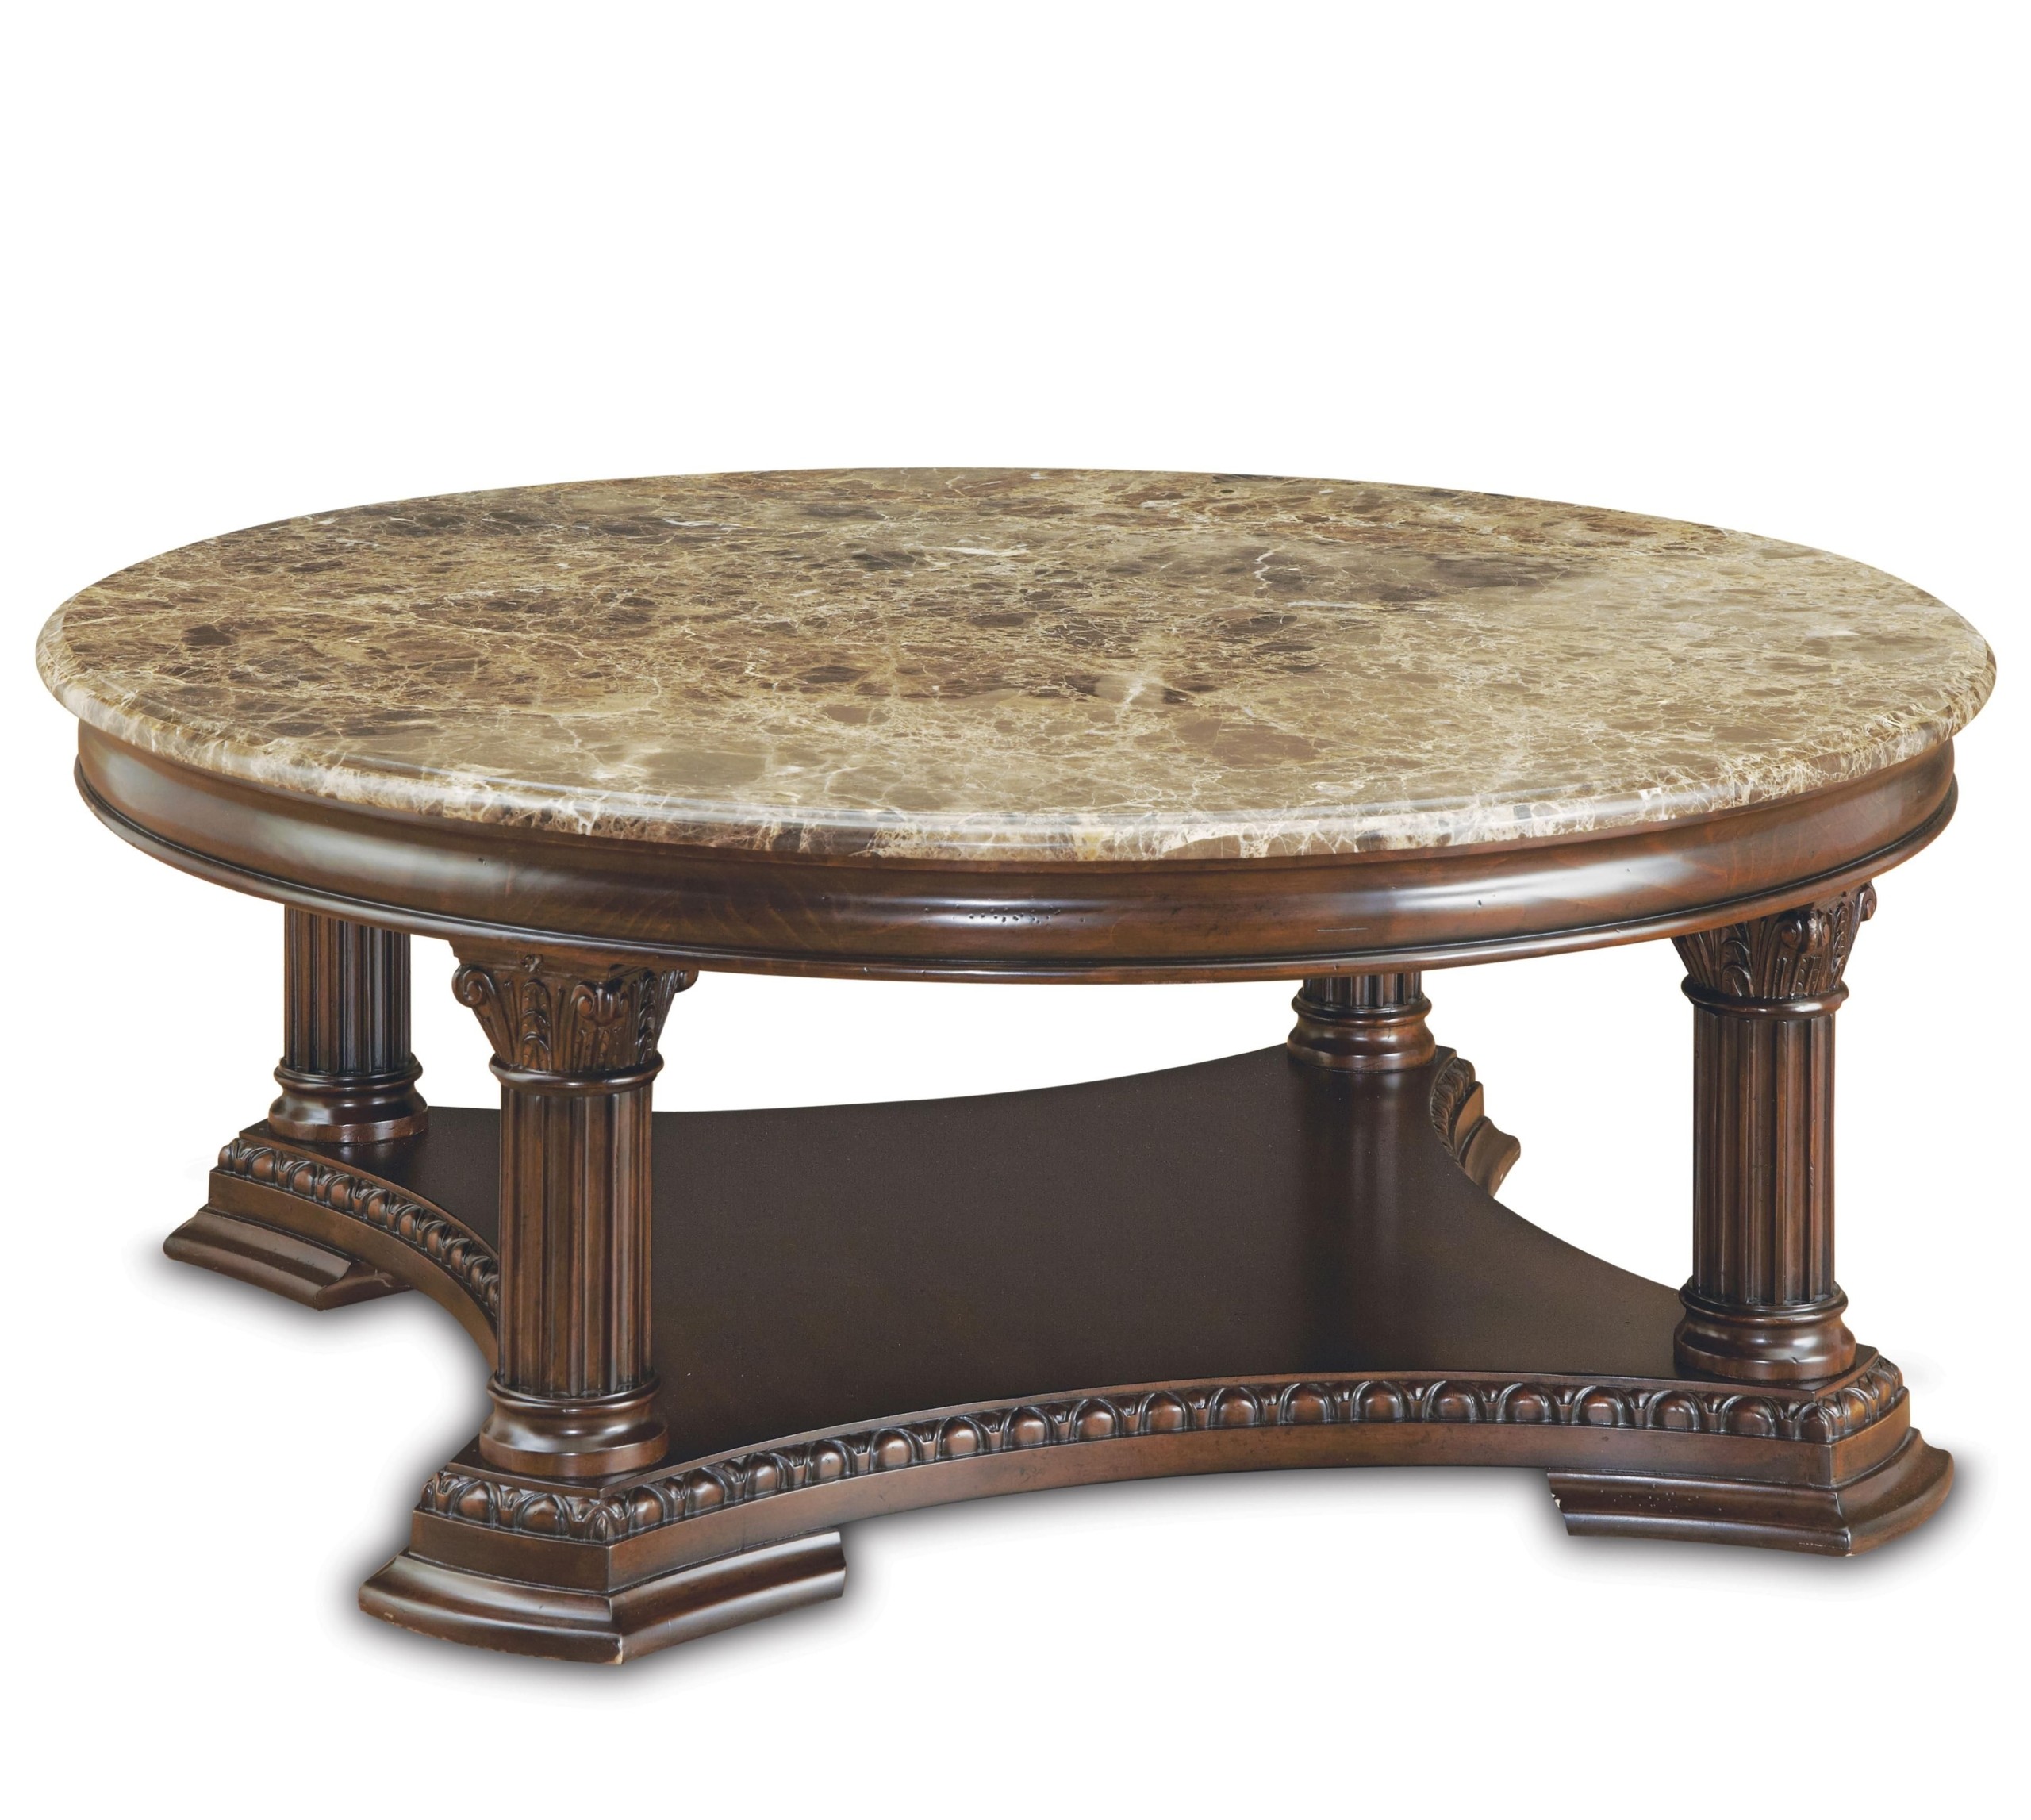 Classy wooden round coffee table design with gorgeous wood carving